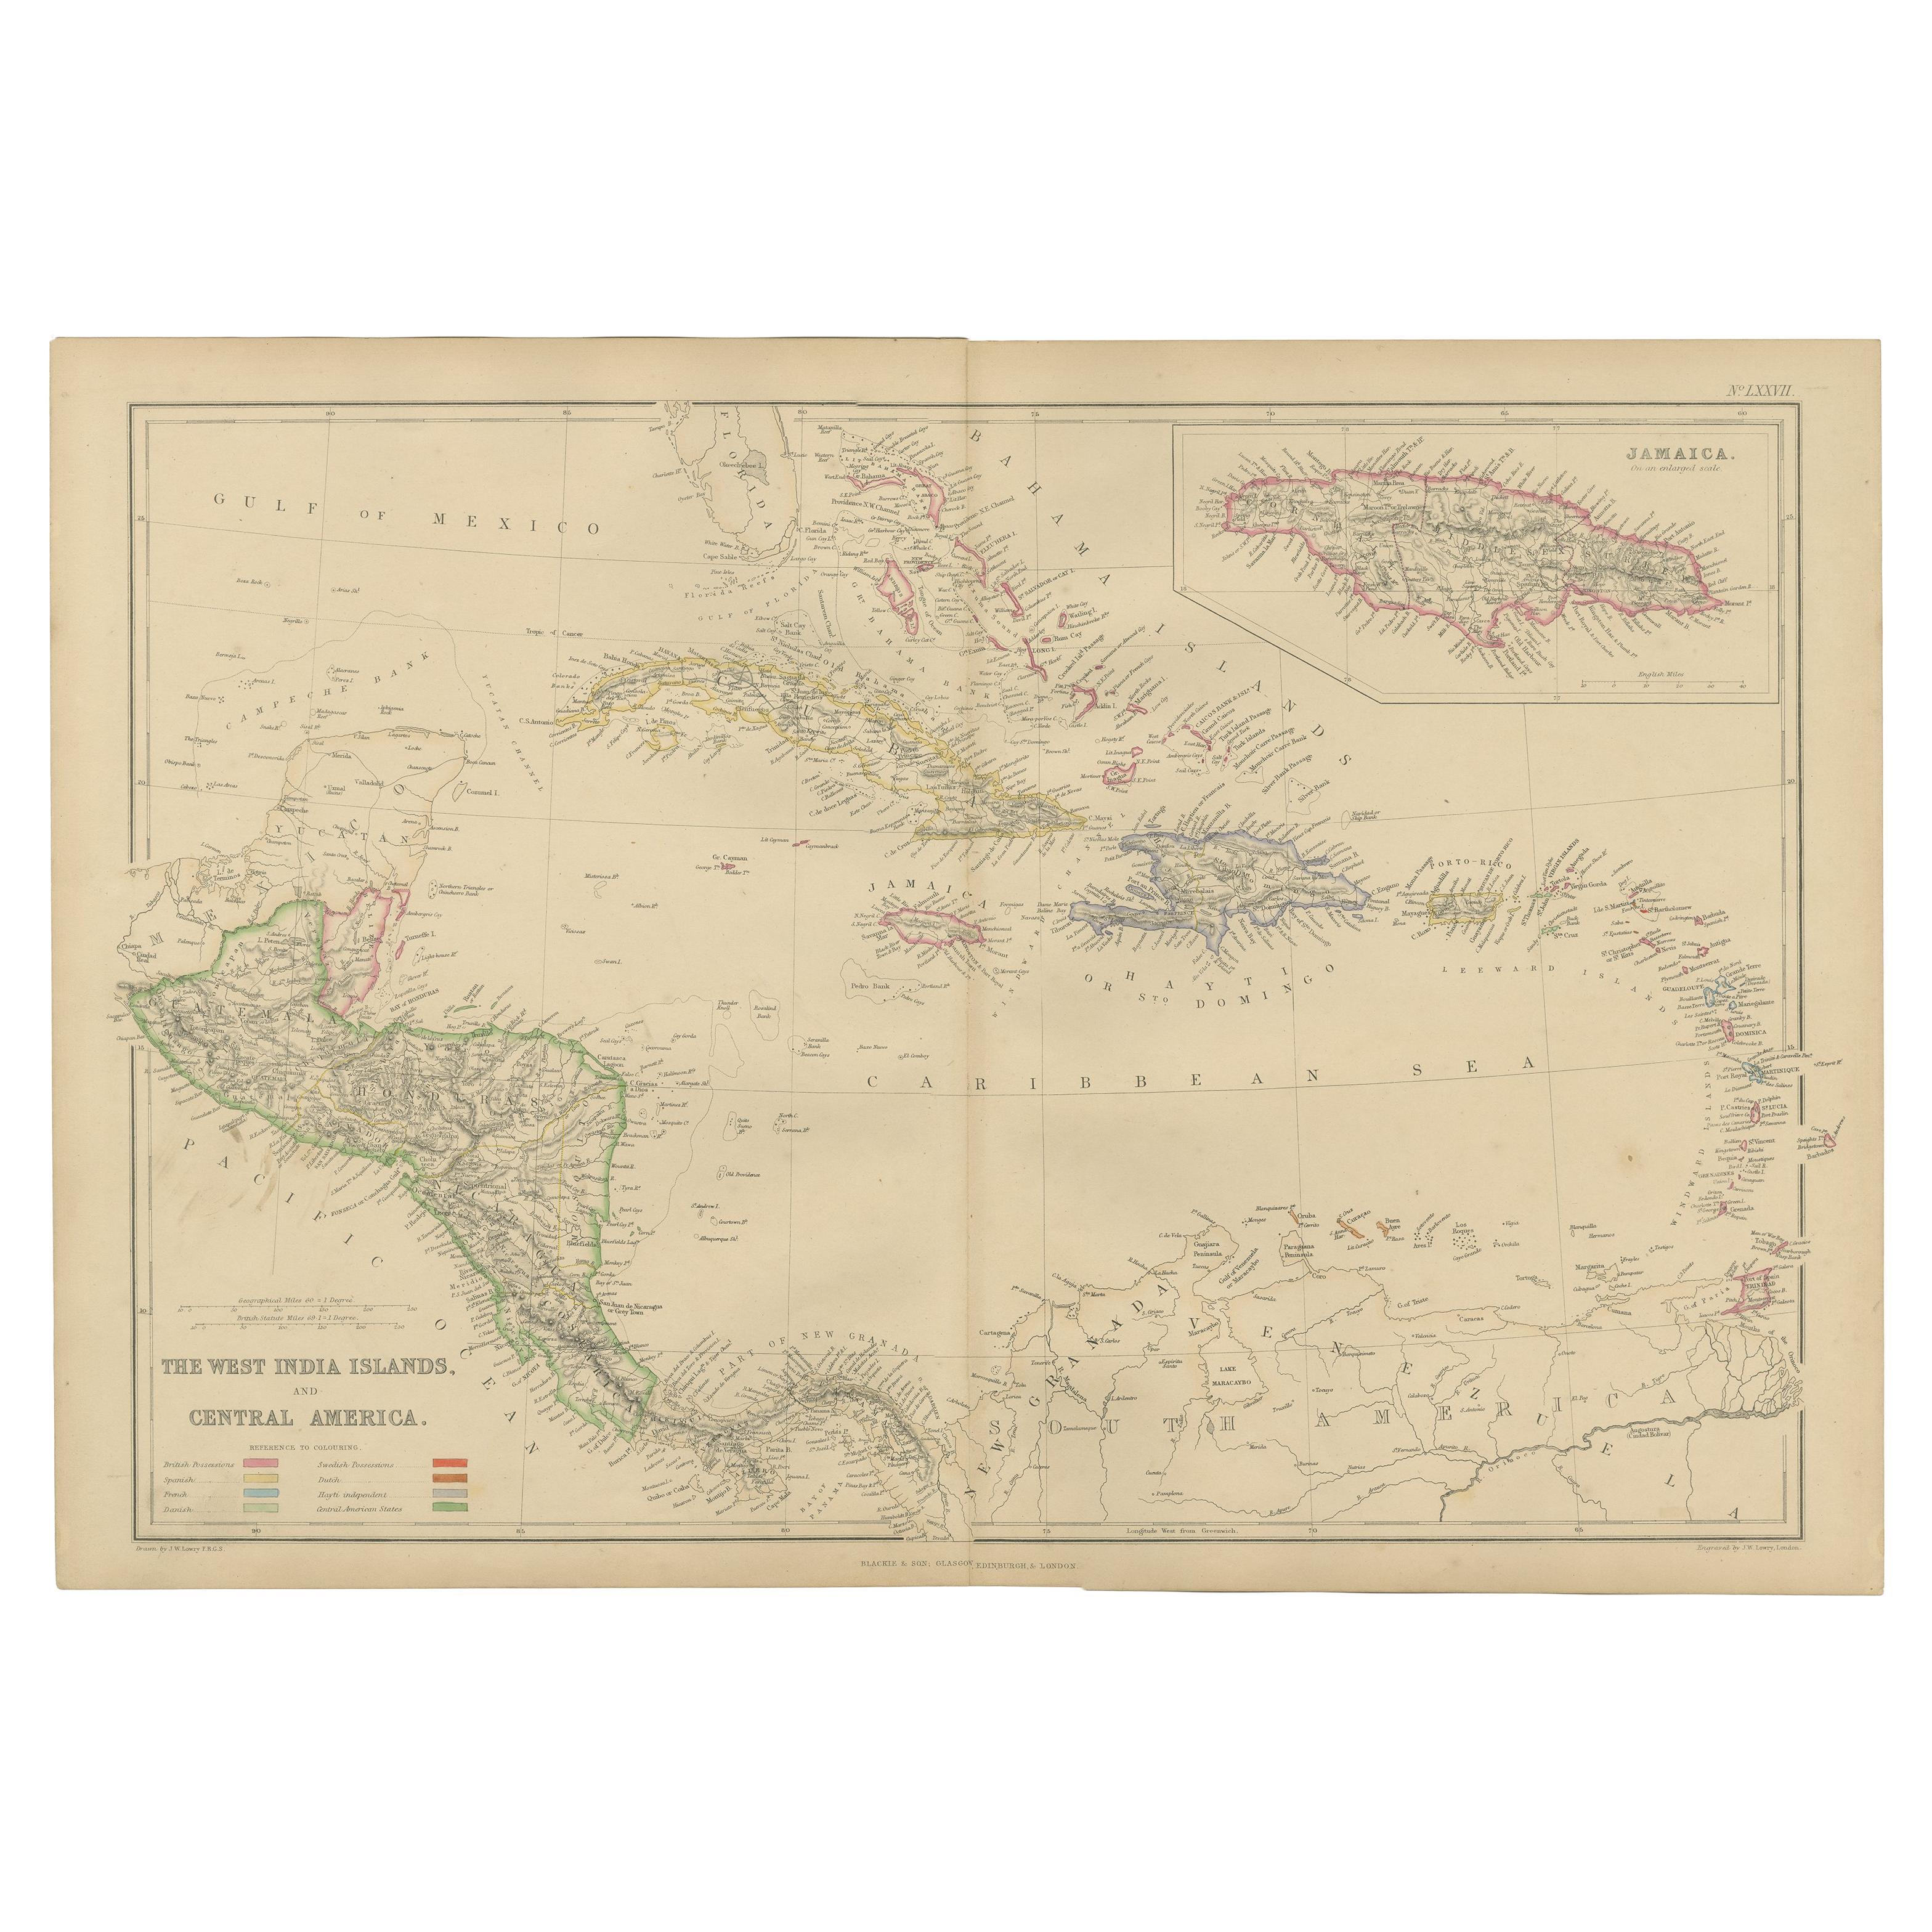 Antique Map of the West Indies and Central America by W. G. Blackie, 1859